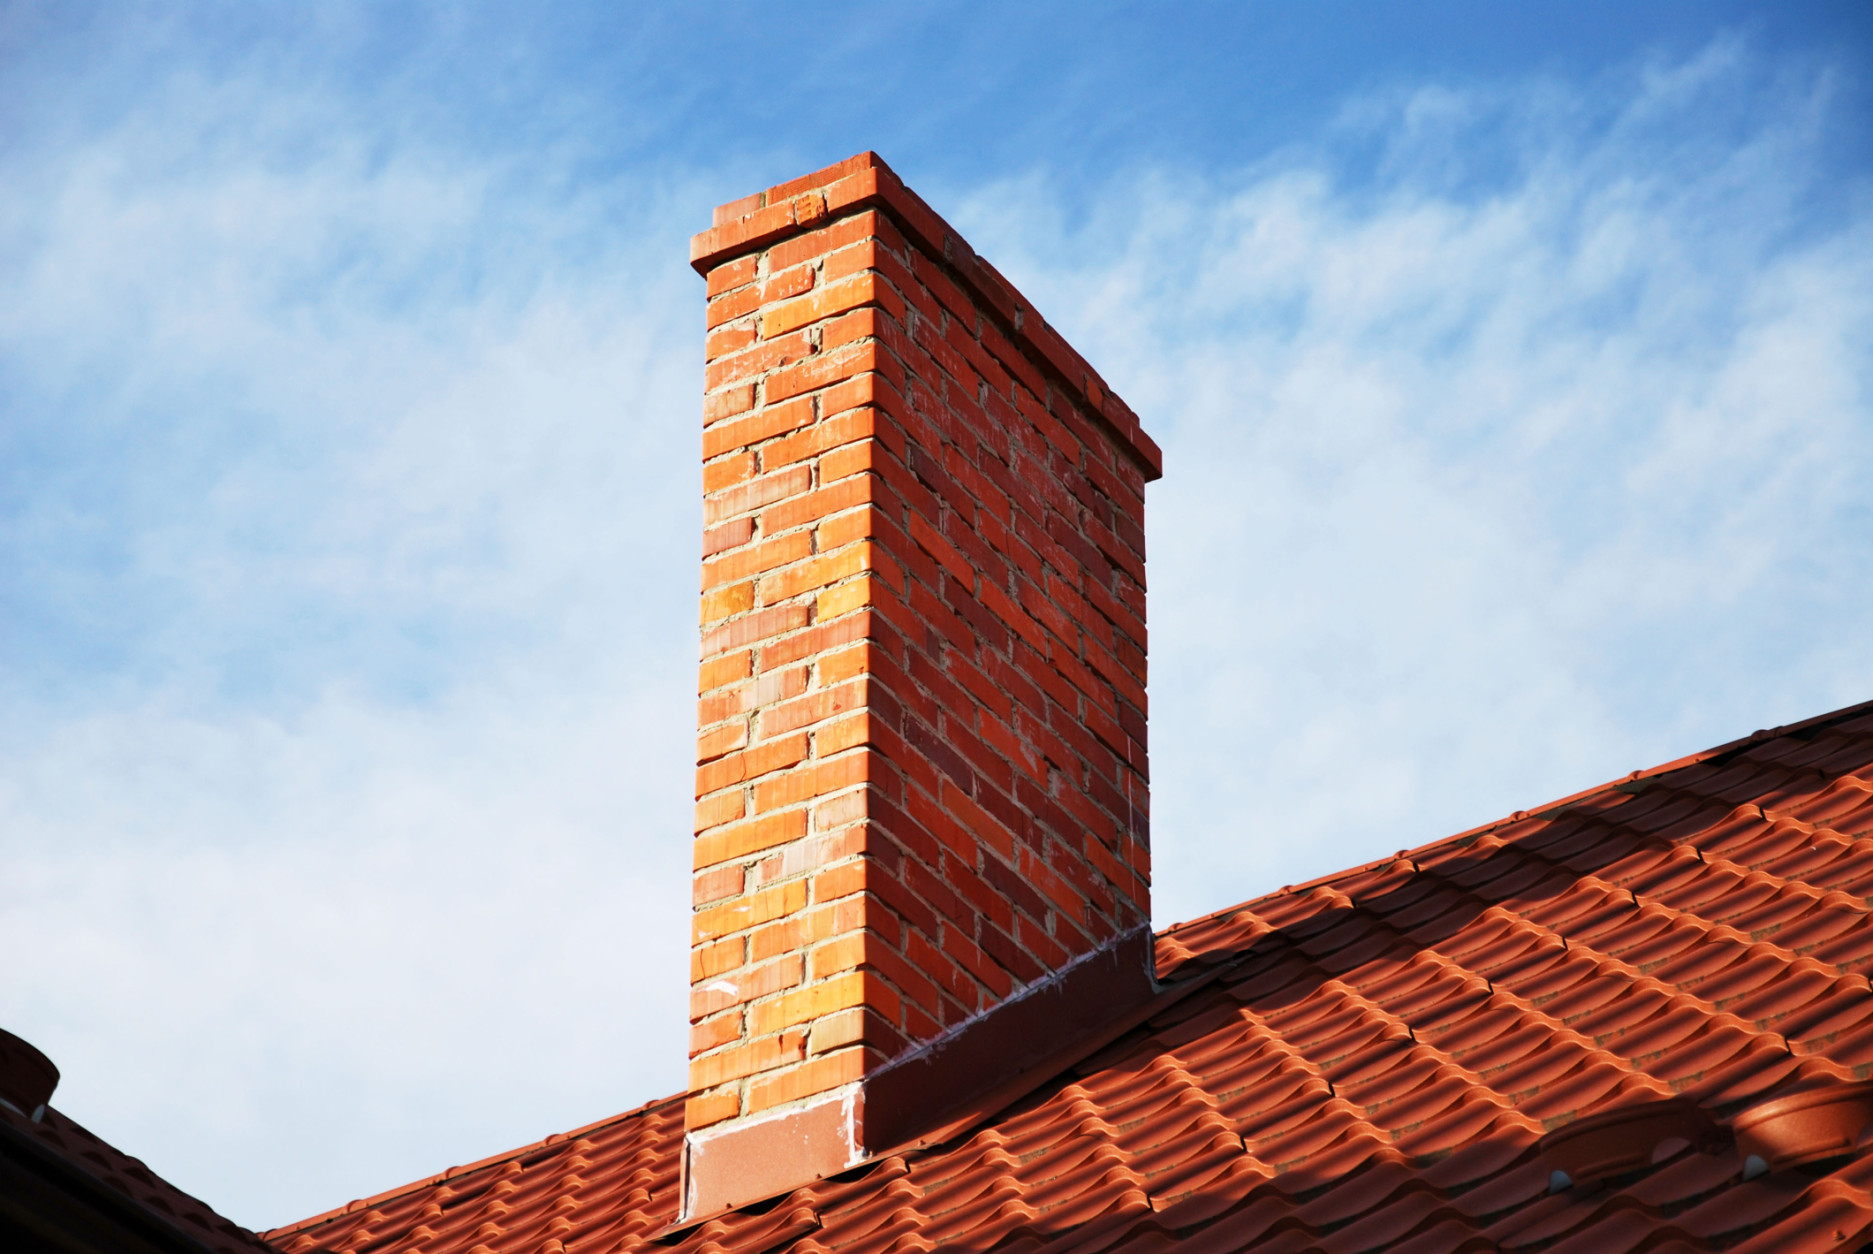 The man tried to hide from police in his family's chimney. (Photo: Thinkstock)